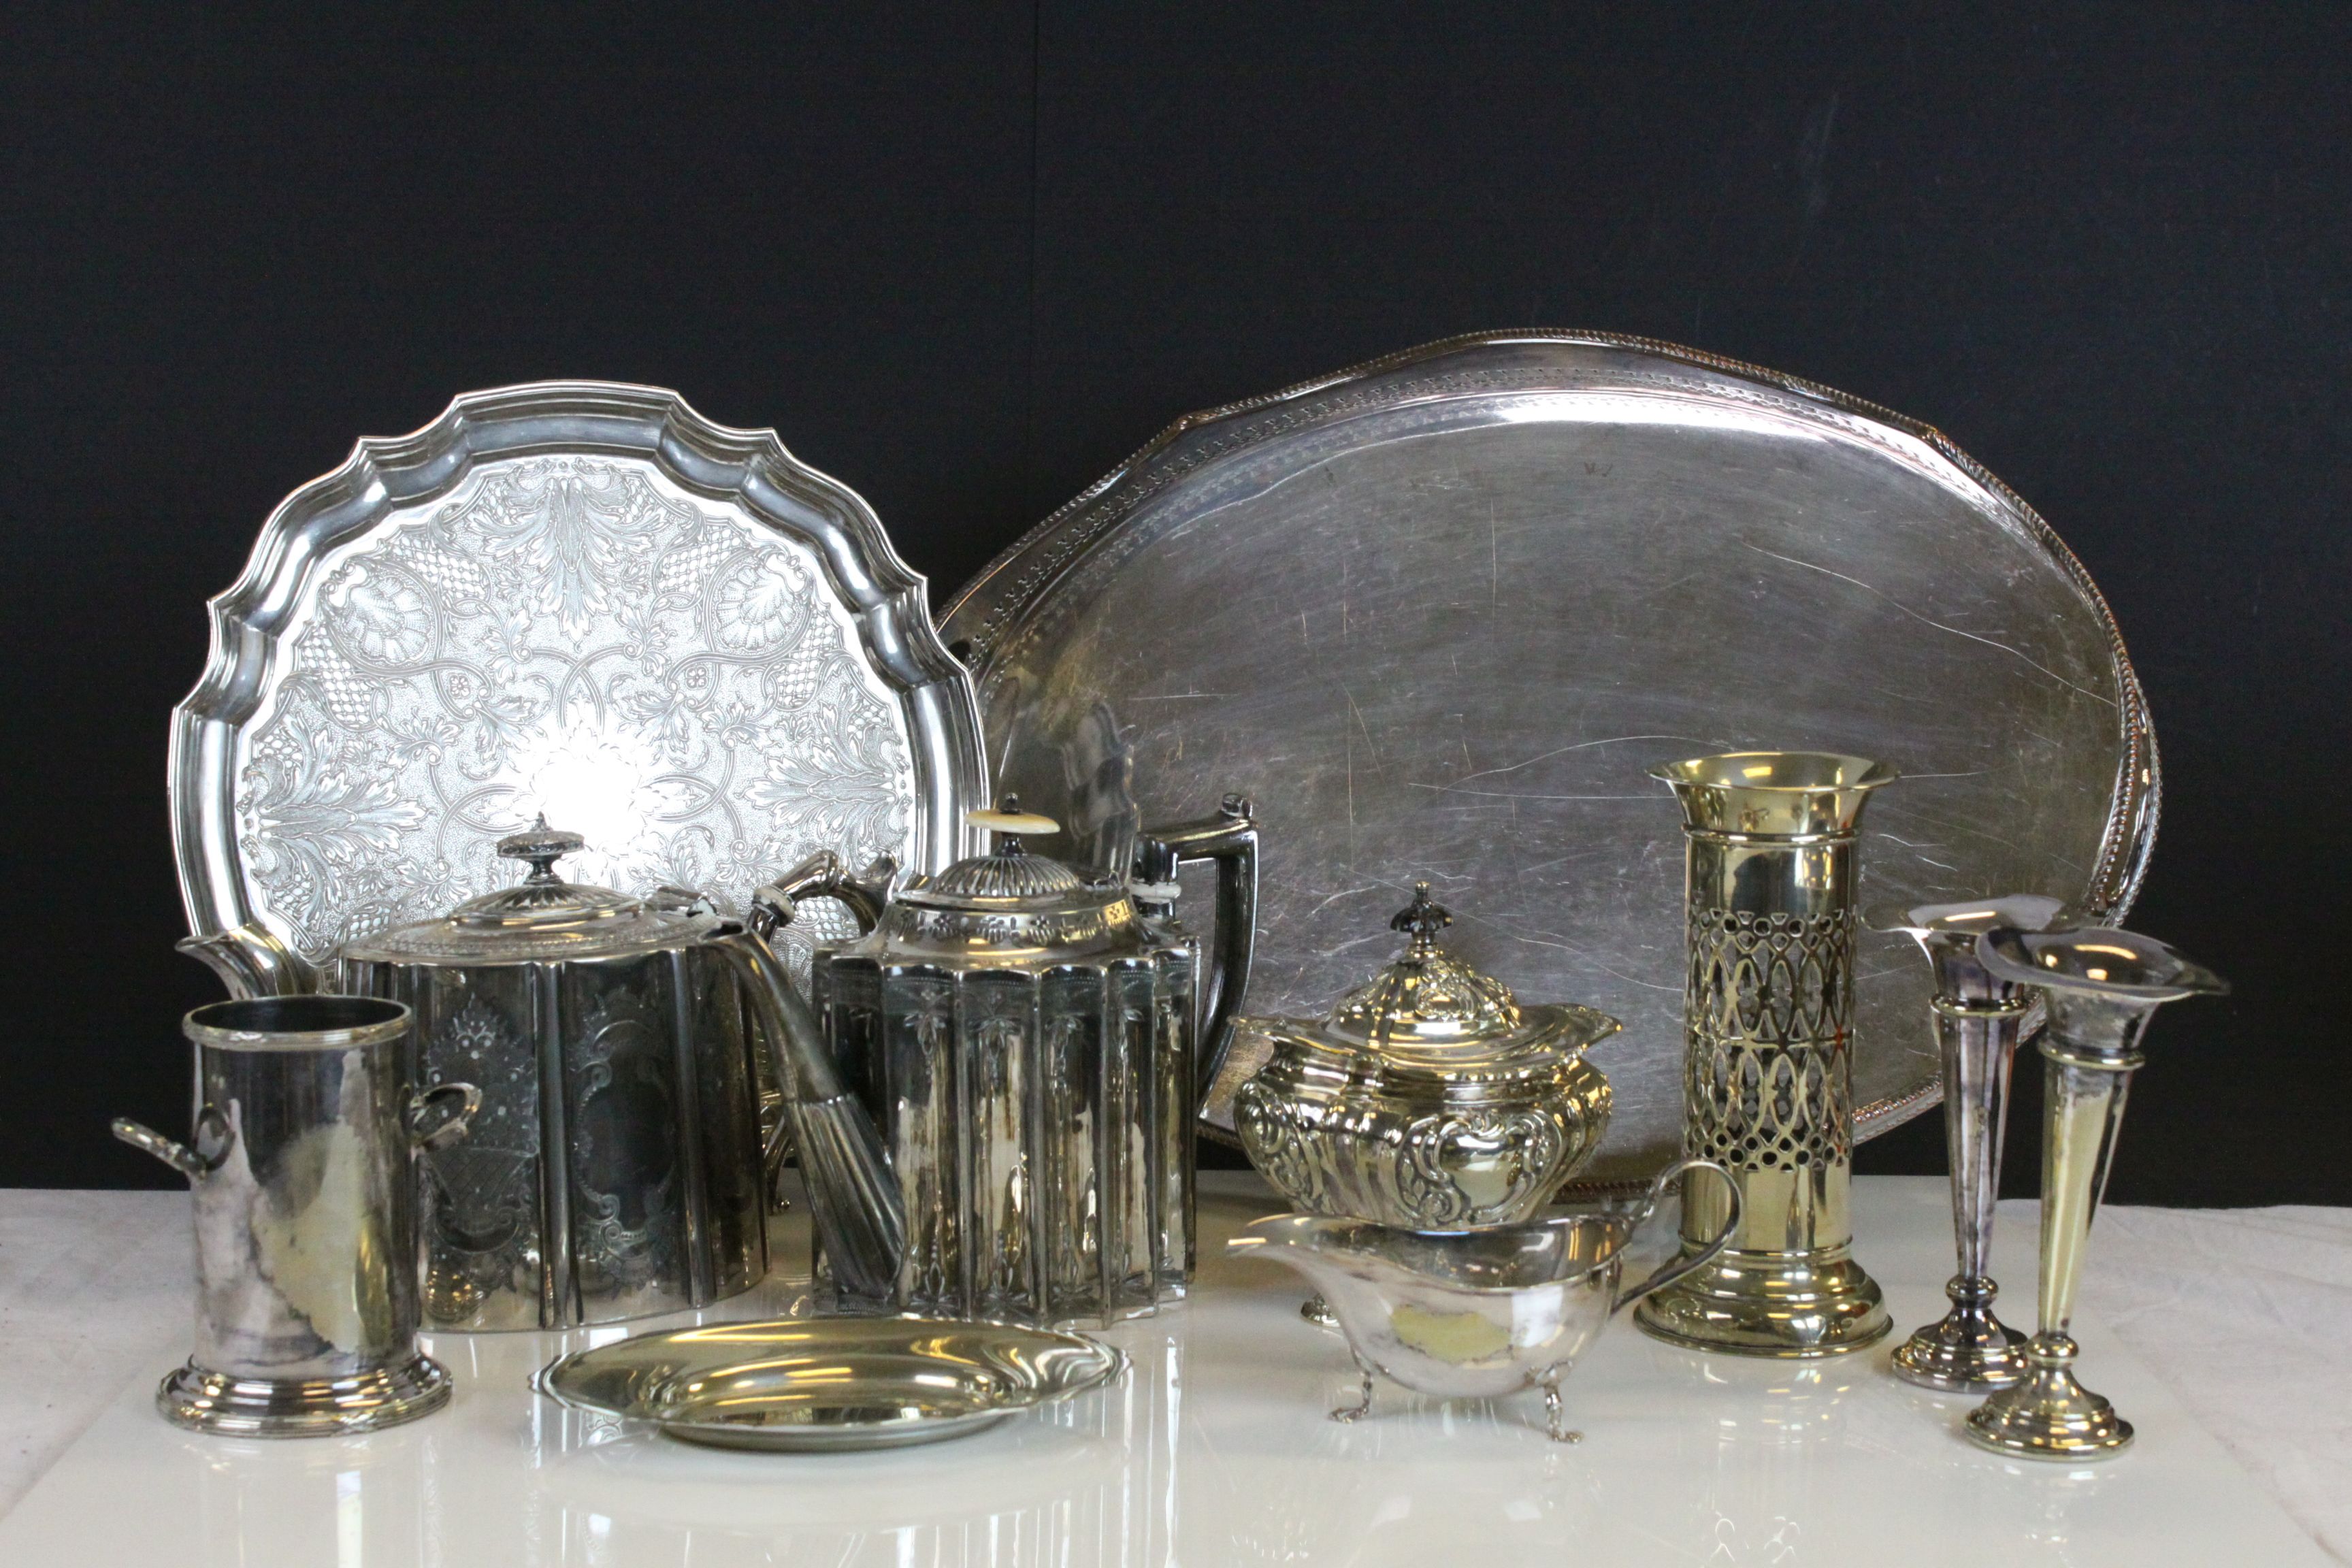 Collection of Silver Plate including Oval Gallery Tray, Pair of Trumpet Vases, Teapots, Sugar